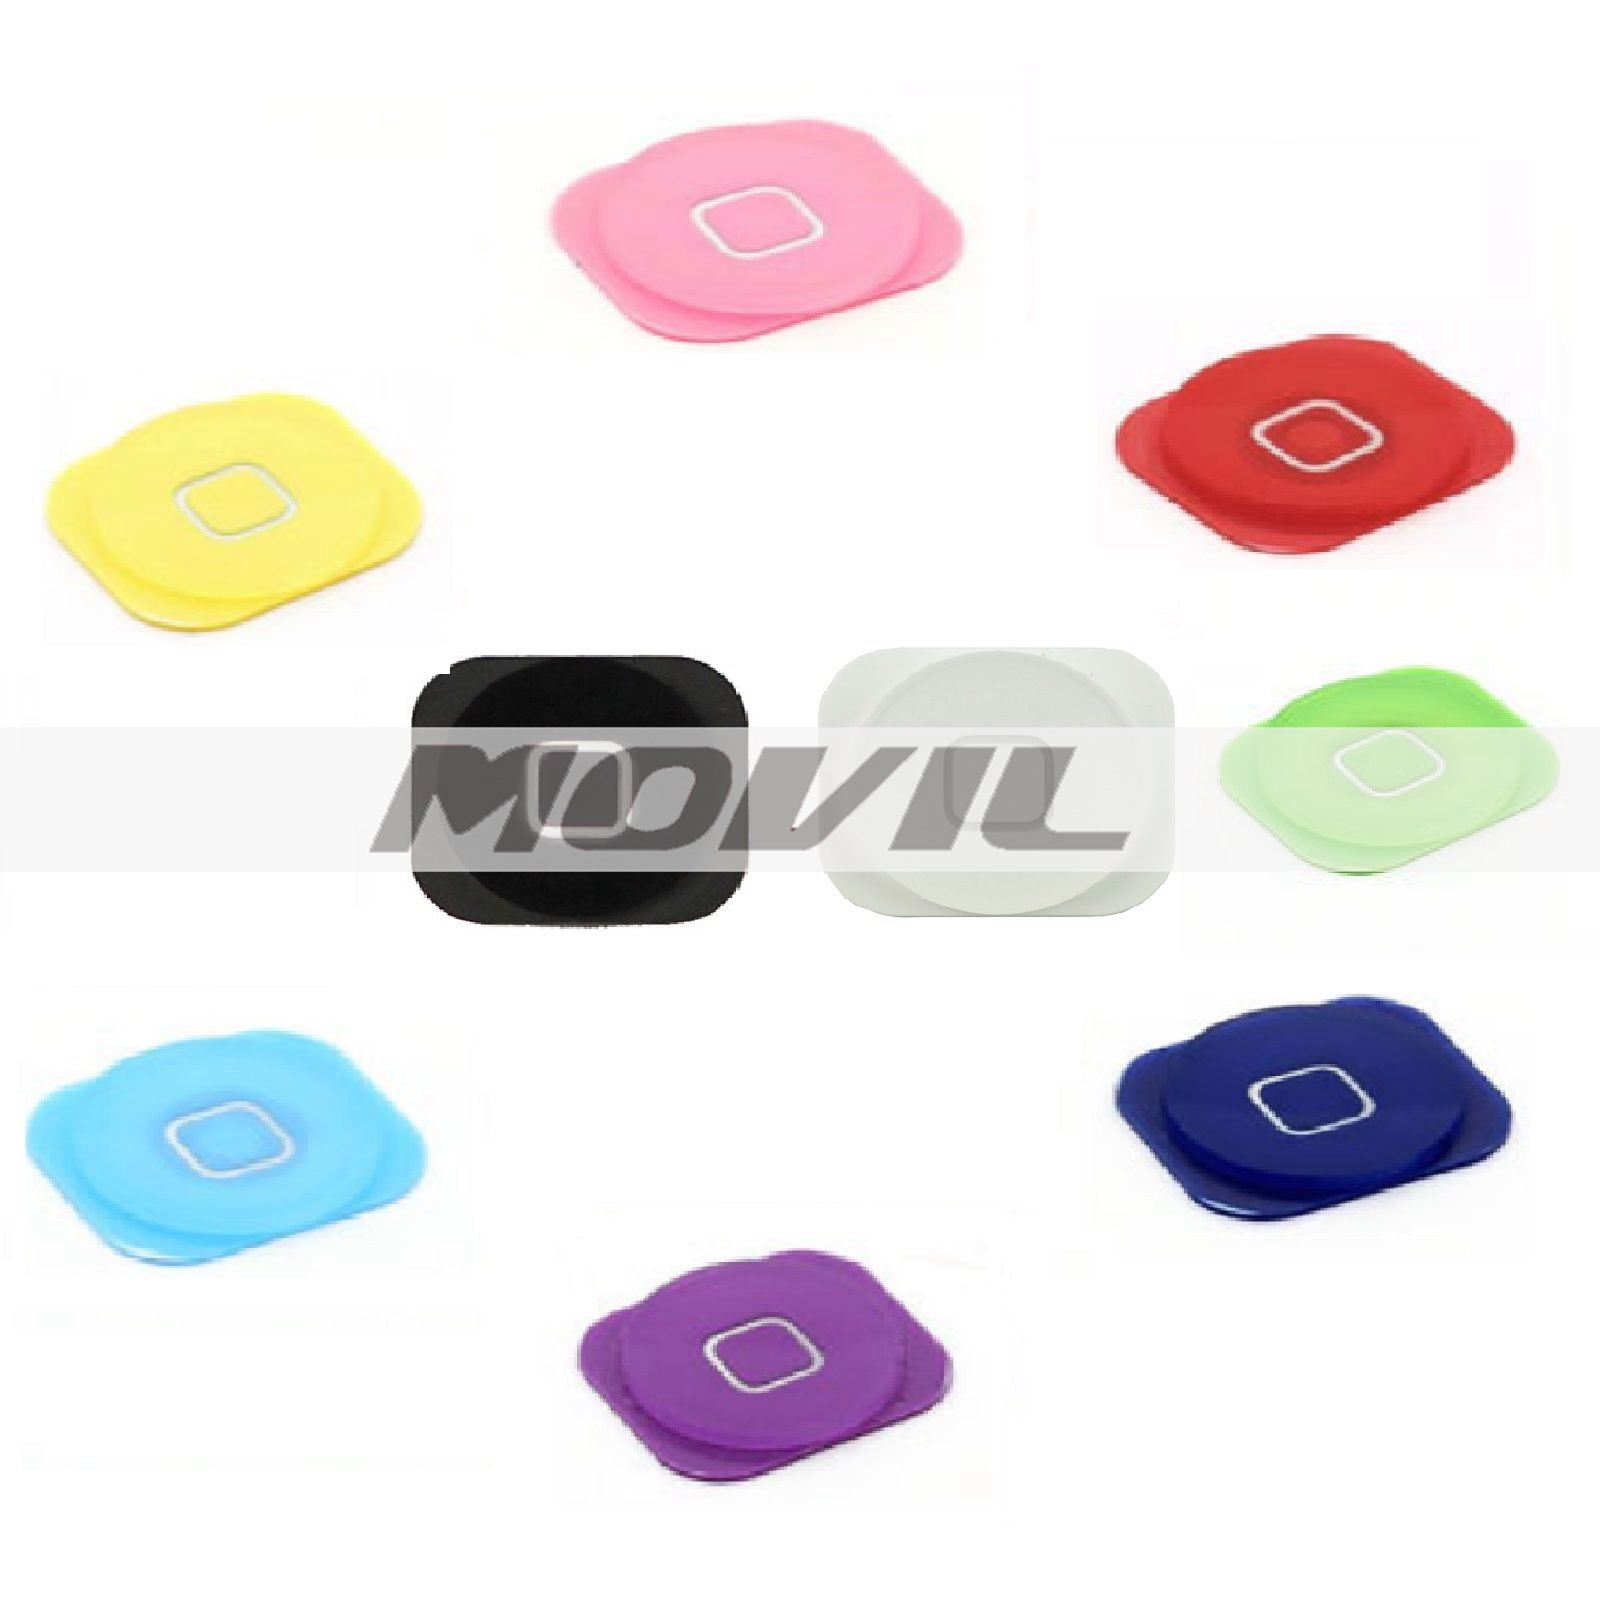 Replacement Coloured Home Button Menu Button For iPhone 5